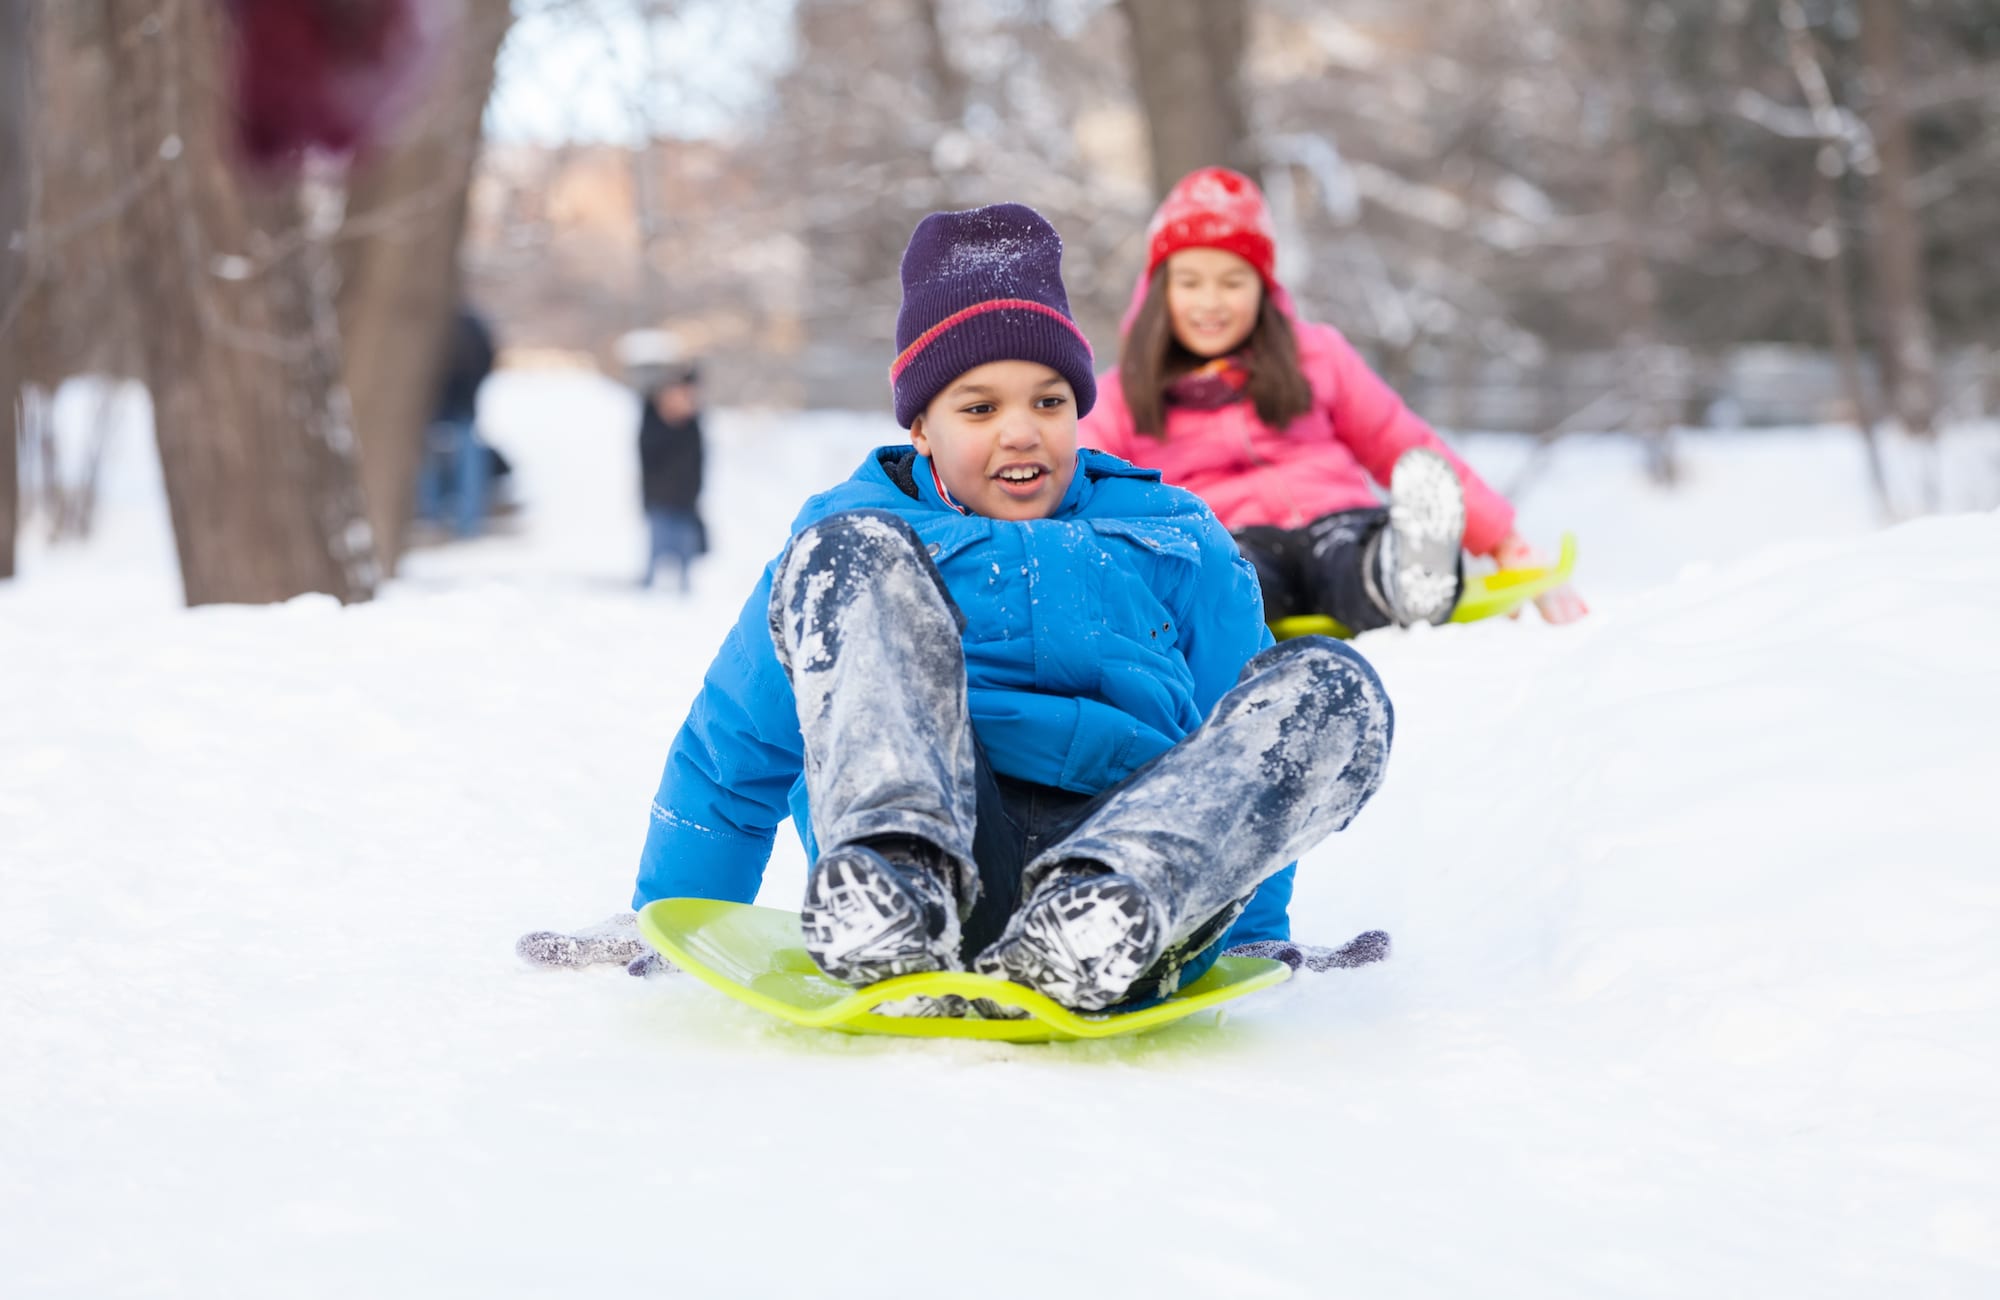 Buffalo Bucket List: Winter Activities for the Whole Family